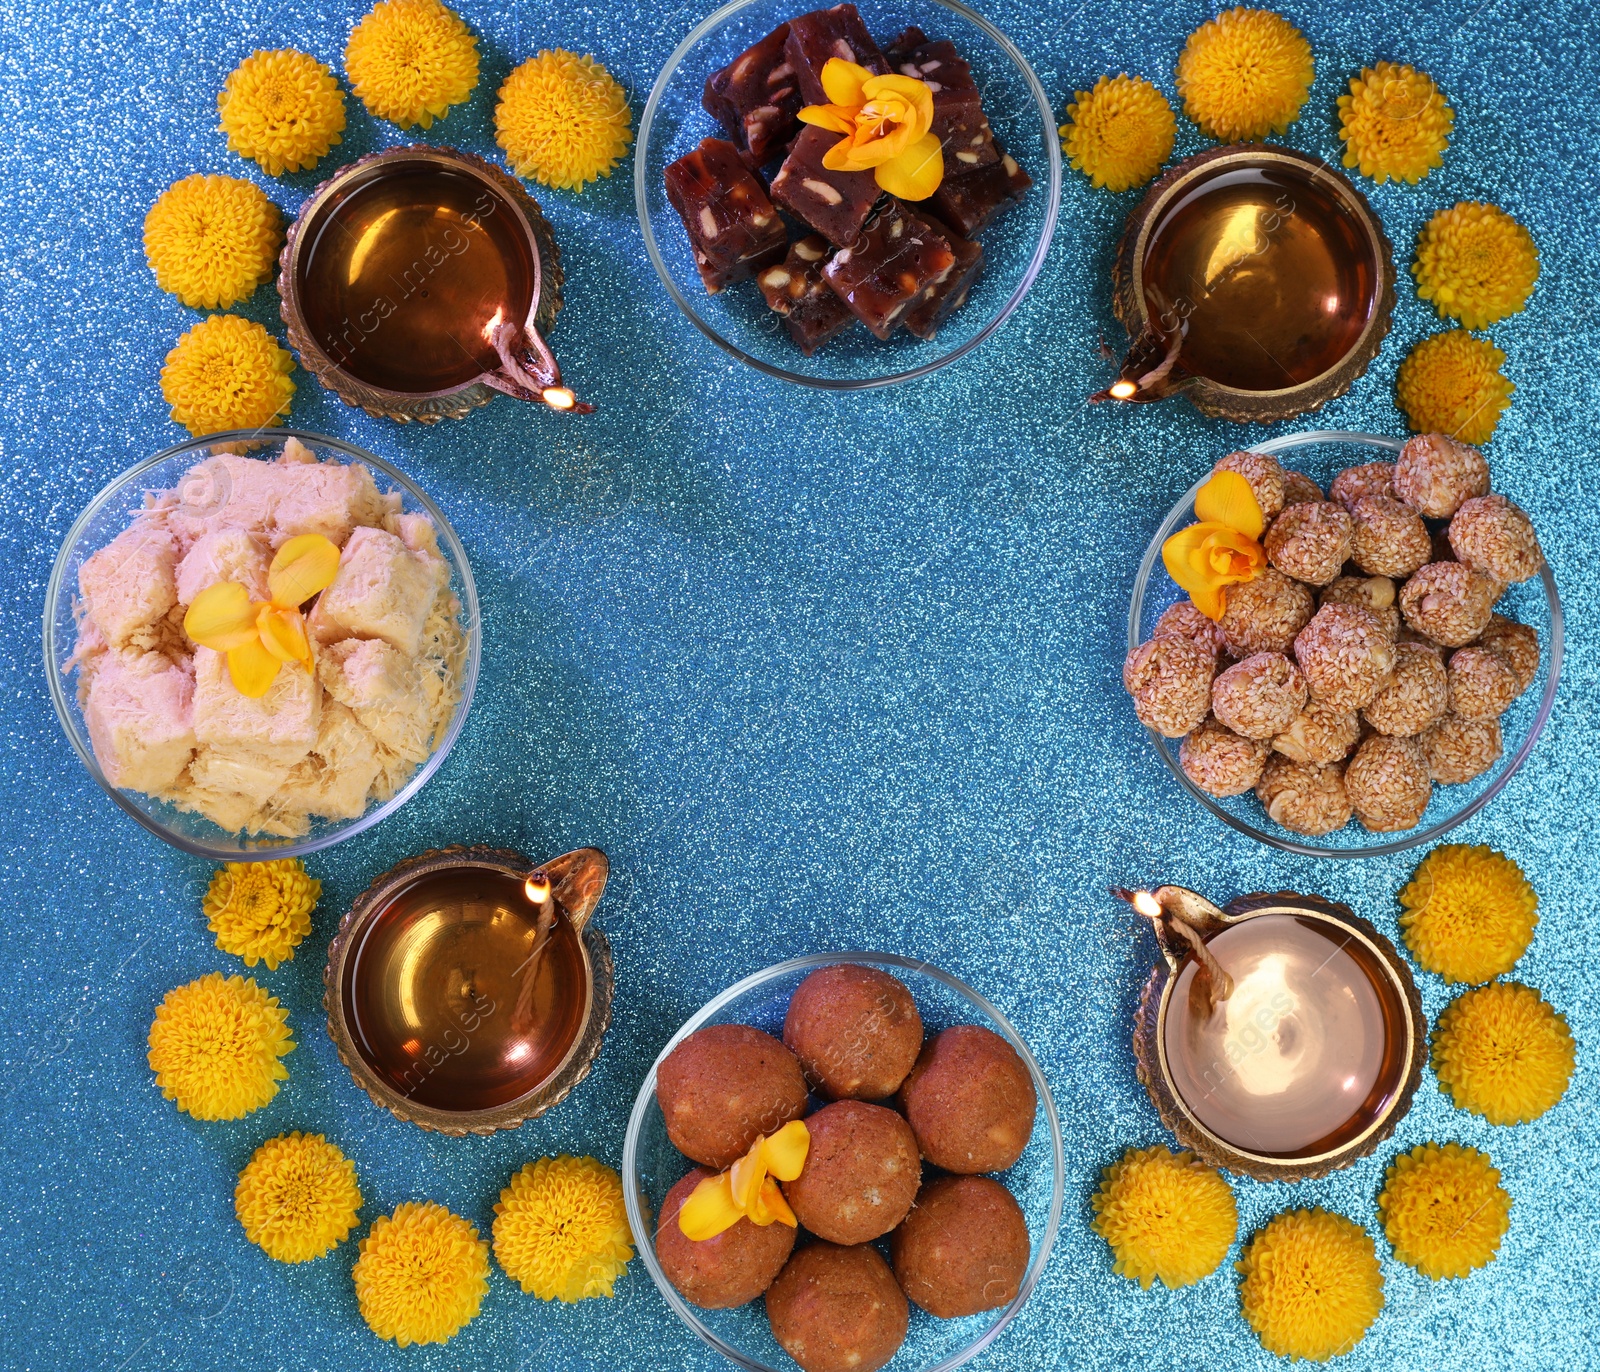 Photo of Diwali celebration. Frame made of diya lamps, tasty Indian sweets and chrysanthemum flowers on shiny light blue table, flat lay with space for text